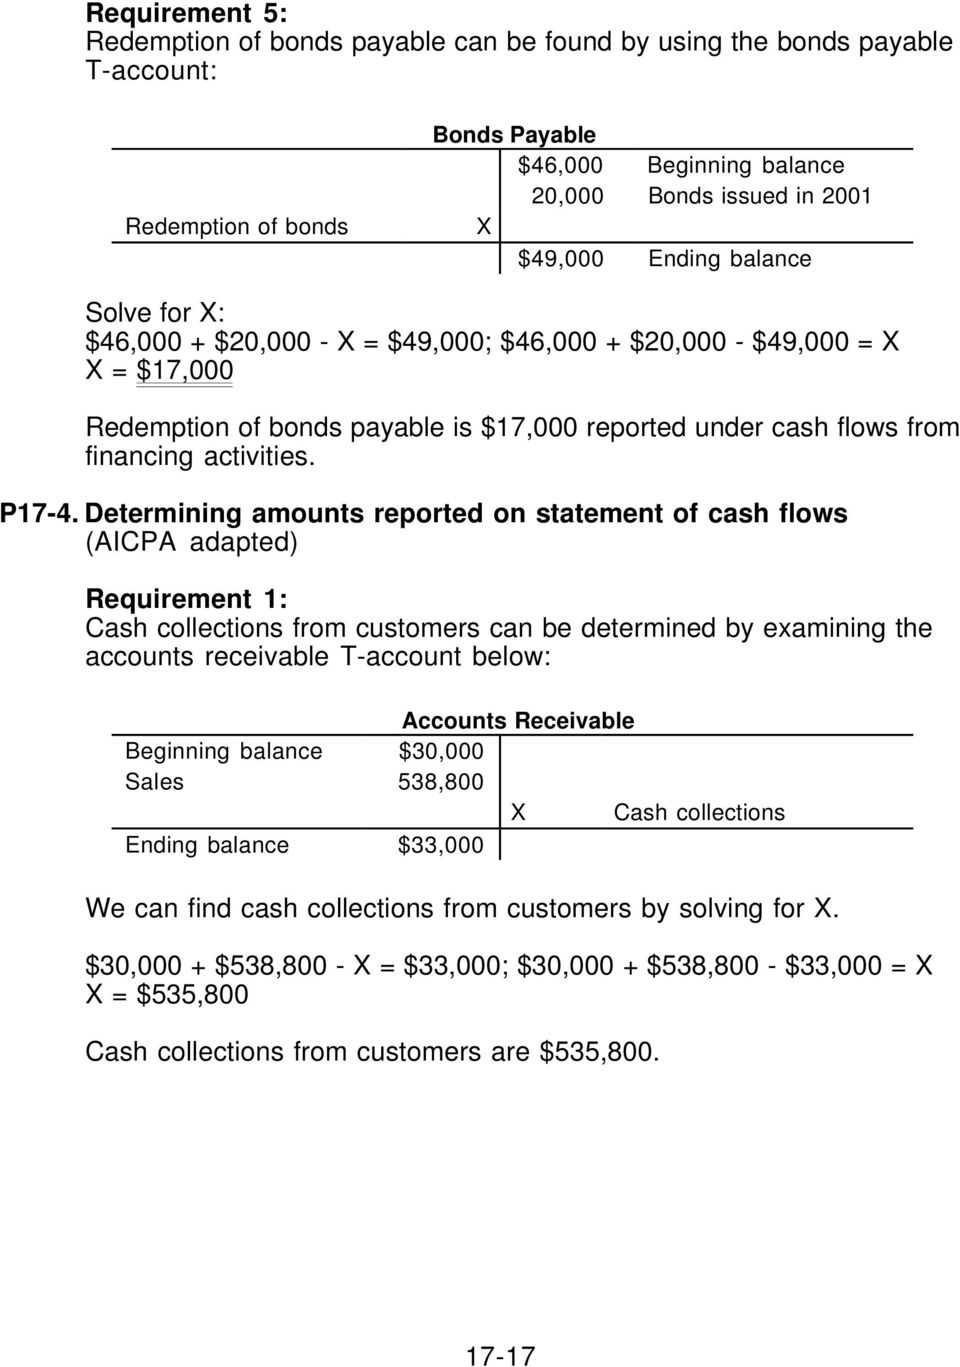 Determining amounts reported on statement of cash flows (AICPA adapted) Requirement 1: Cash collections from customers can be determined by examining the accounts receivable T-account below: Accounts